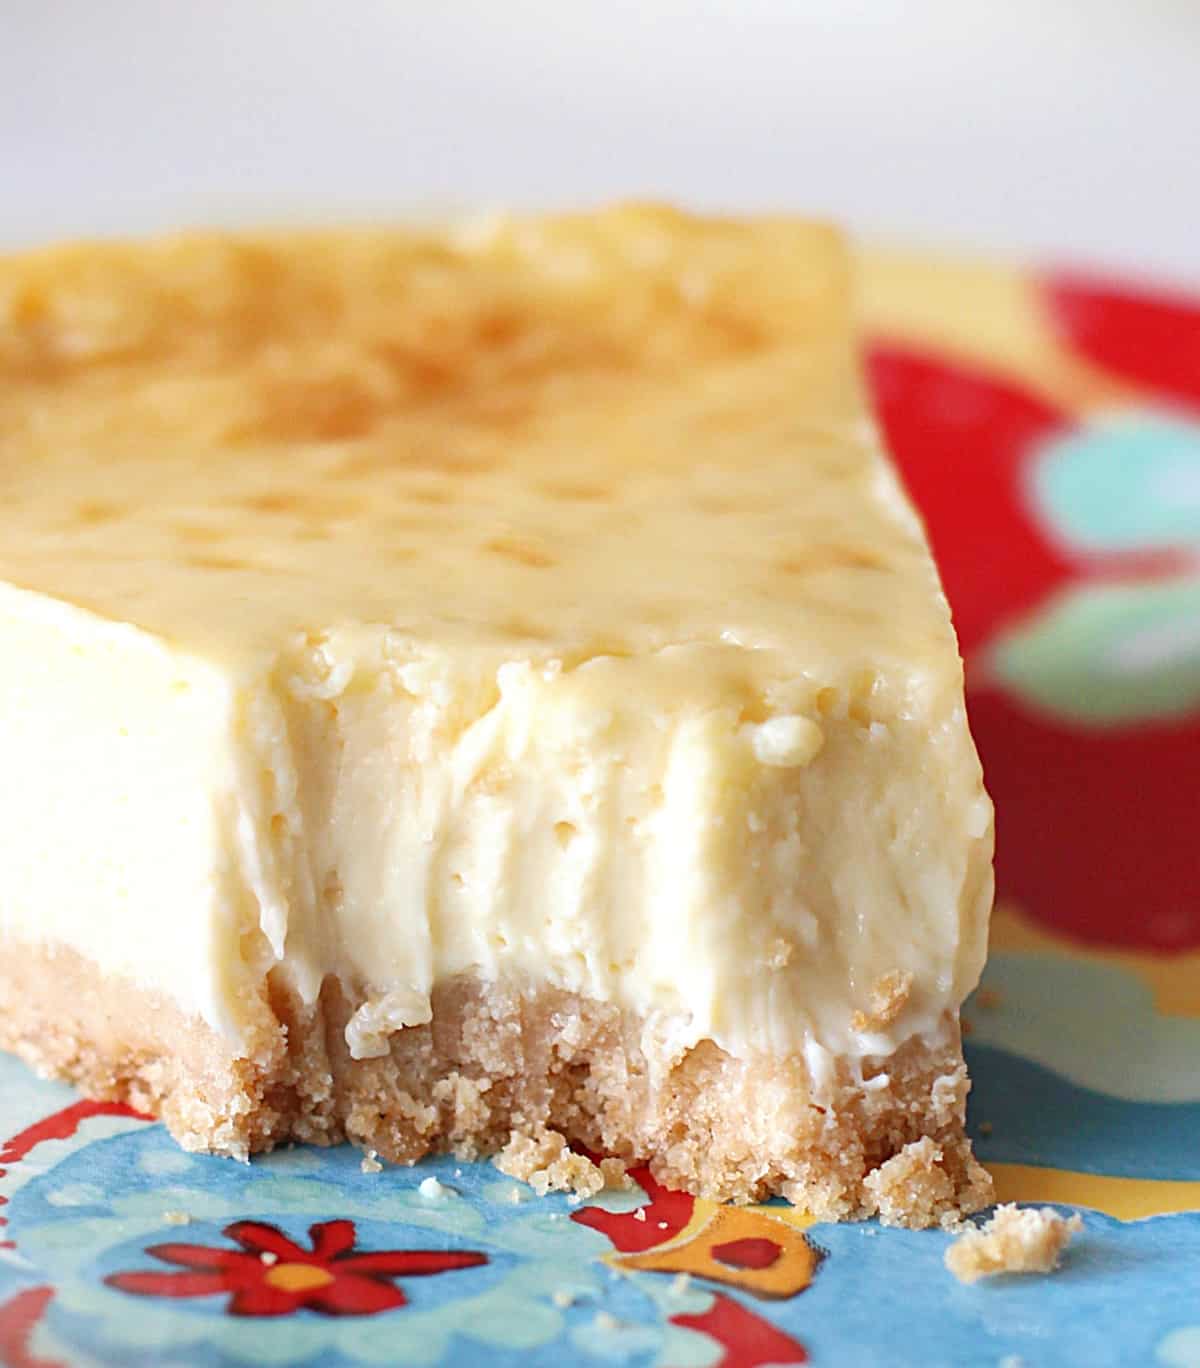 Close up of a colorful plate with a bitten slice of plain cheesecake, crumbs and fork marks